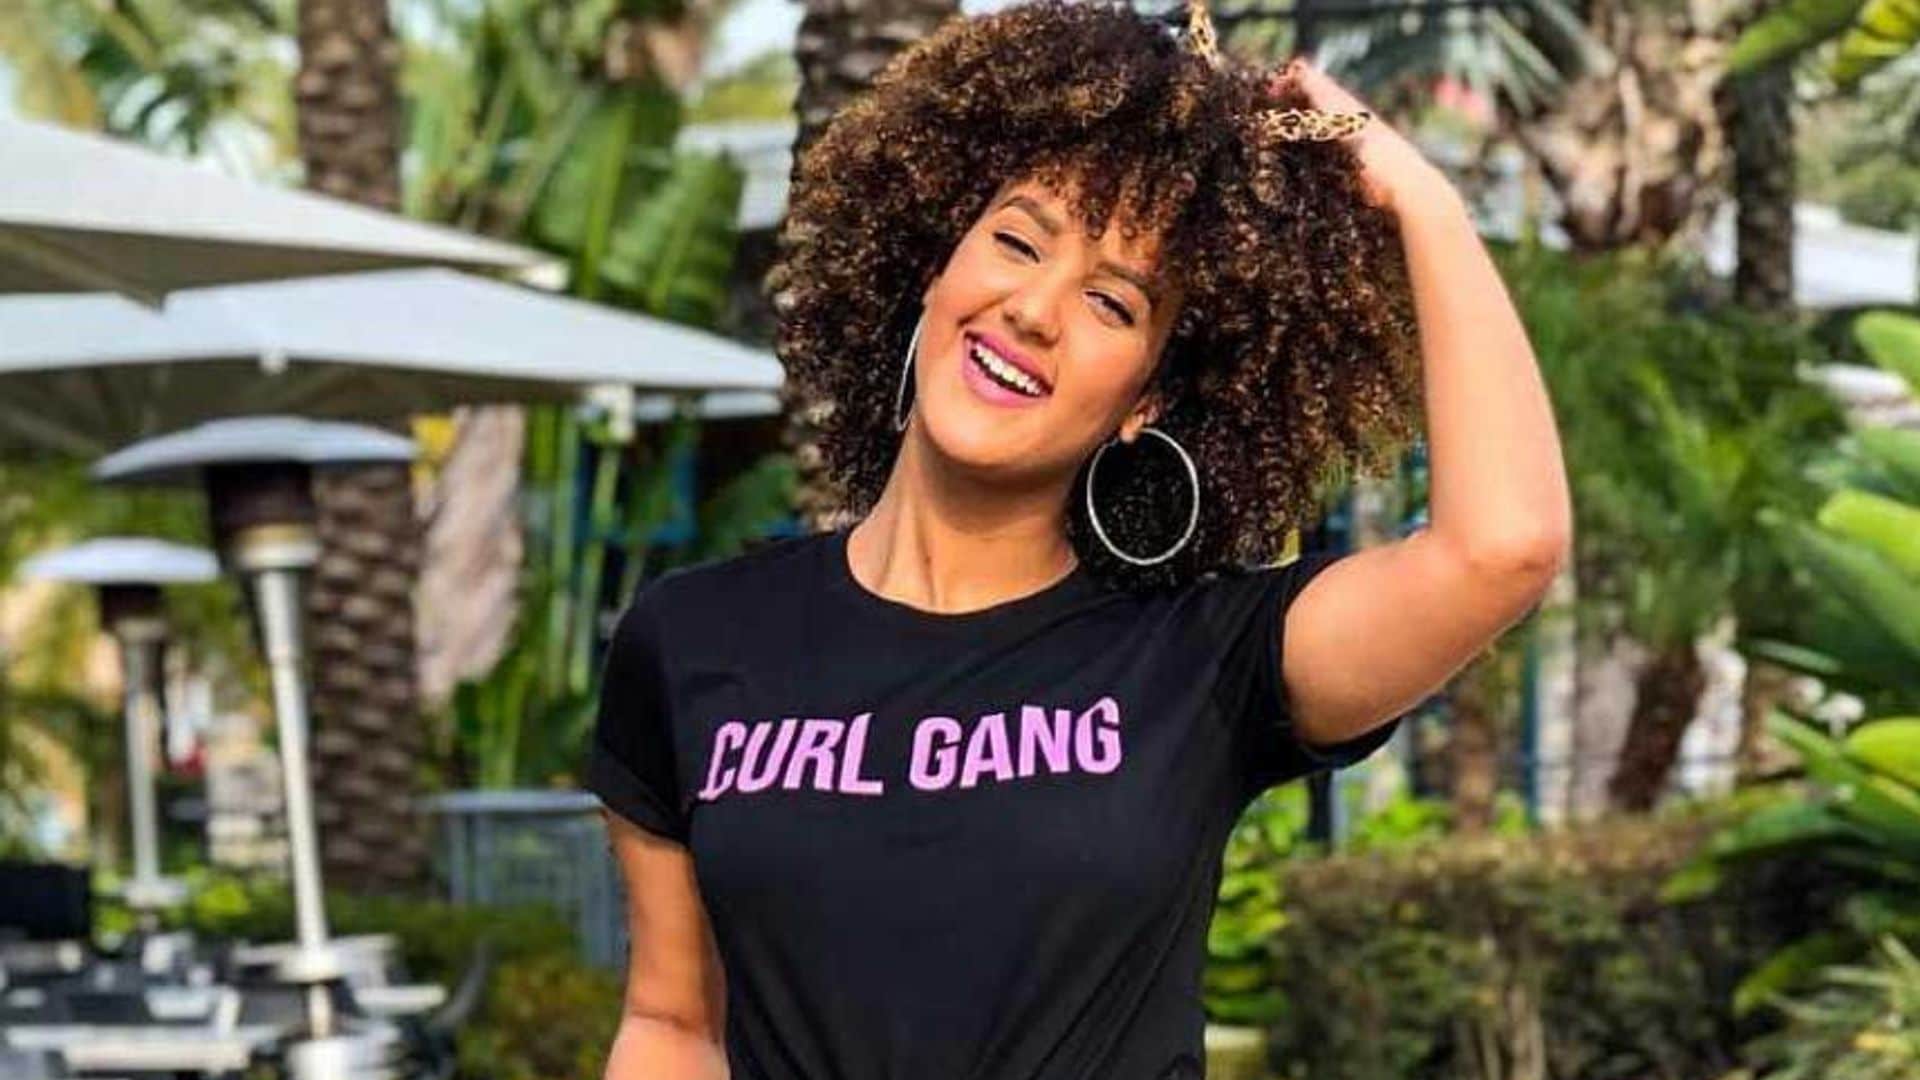 How Hause of Curls’ Founder Sherly Tavarez transformed ‘pelo malo’ into an empowering business